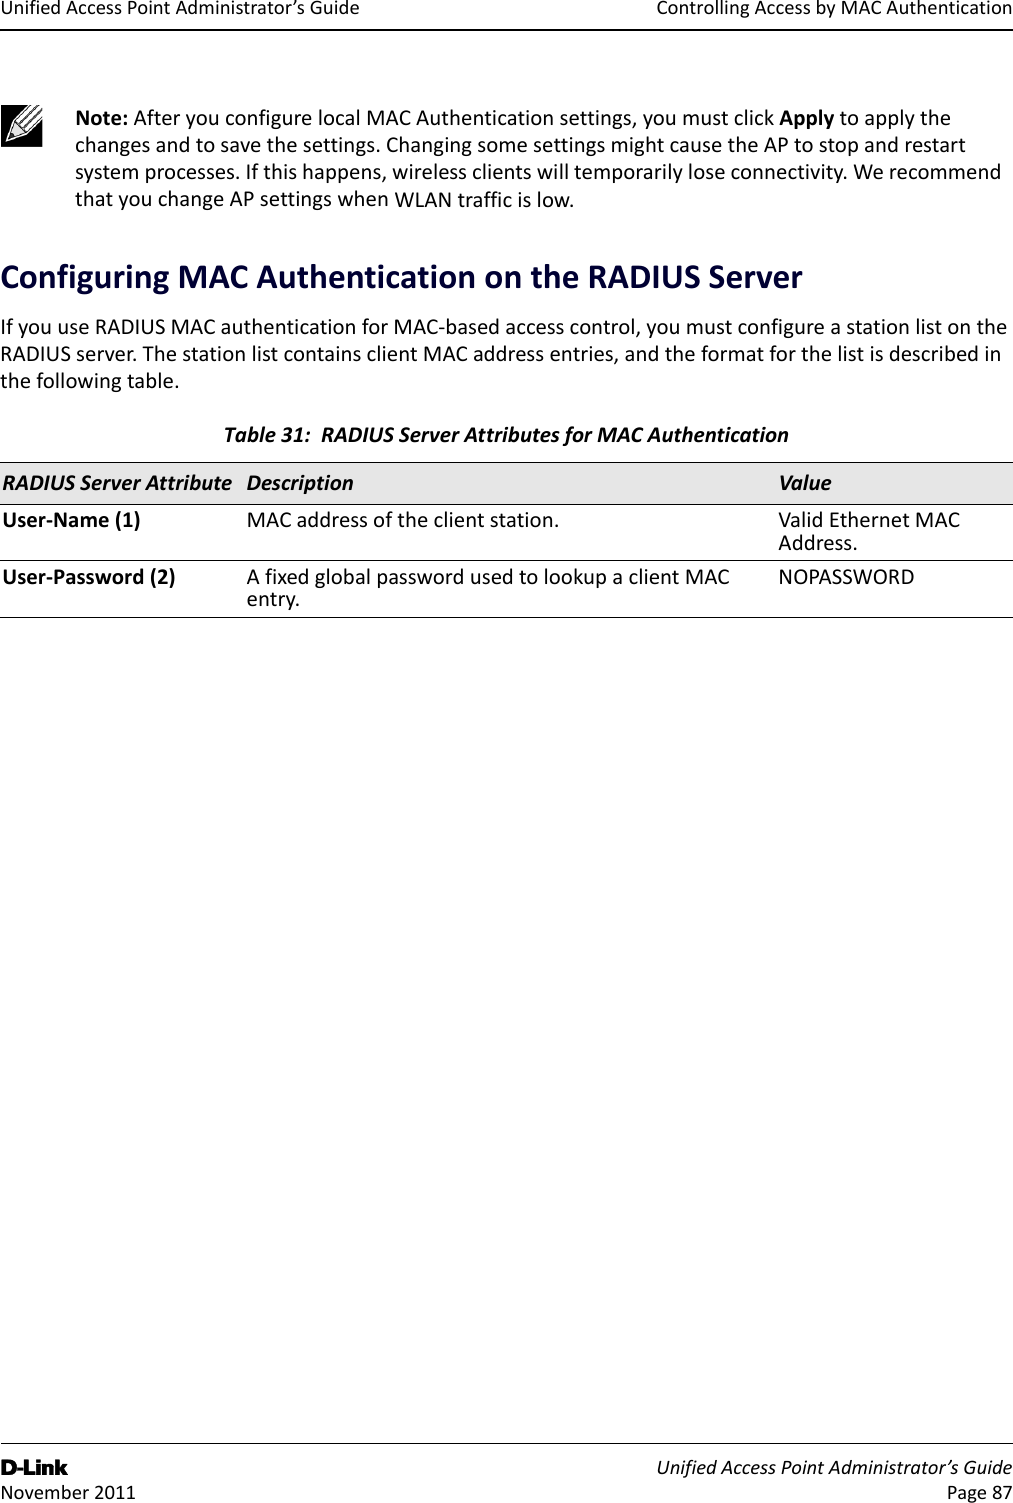 ControllingAccessbyMACAuthenticationD-Link UnifiedAccessPointAdministrator’sGuide November2011 Page87UnifiedAccessPointAdministrator’sGuideConfiguringMACAuthenticationontheRADIUSServerIfyouuseRADIUSMACauthenticationforMAC‐basedaccesscontrol,youmustconfigureastationlistontheRADIUSserver.ThestationlistcontainsclientMACaddressentries,andtheformatforthelistisdescribedinthefollowingtable.Note:AfteryouconfigurelocalMACAuthenticationsettings,youmustclickApplytoapplythechangesandtosavethesettings.ChangingsomesettingsmightcausetheAPtostopandrestartsystemprocesses.Ifthishappens,wirelessclientswilltemporarilyloseconnectivity.WerecommendthatyouchangeAPsettingswhenWLANtrafficislow.Table31:RADIUSServerAttributesforMACAuthenticationRADIUSServerAttribute Description ValueUser‐Name(1) MACaddressoftheclientstation. ValidEthernetMACAddress.User‐Password(2) AfixedglobalpasswordusedtolookupaclientMACentry.NOPASSWORD